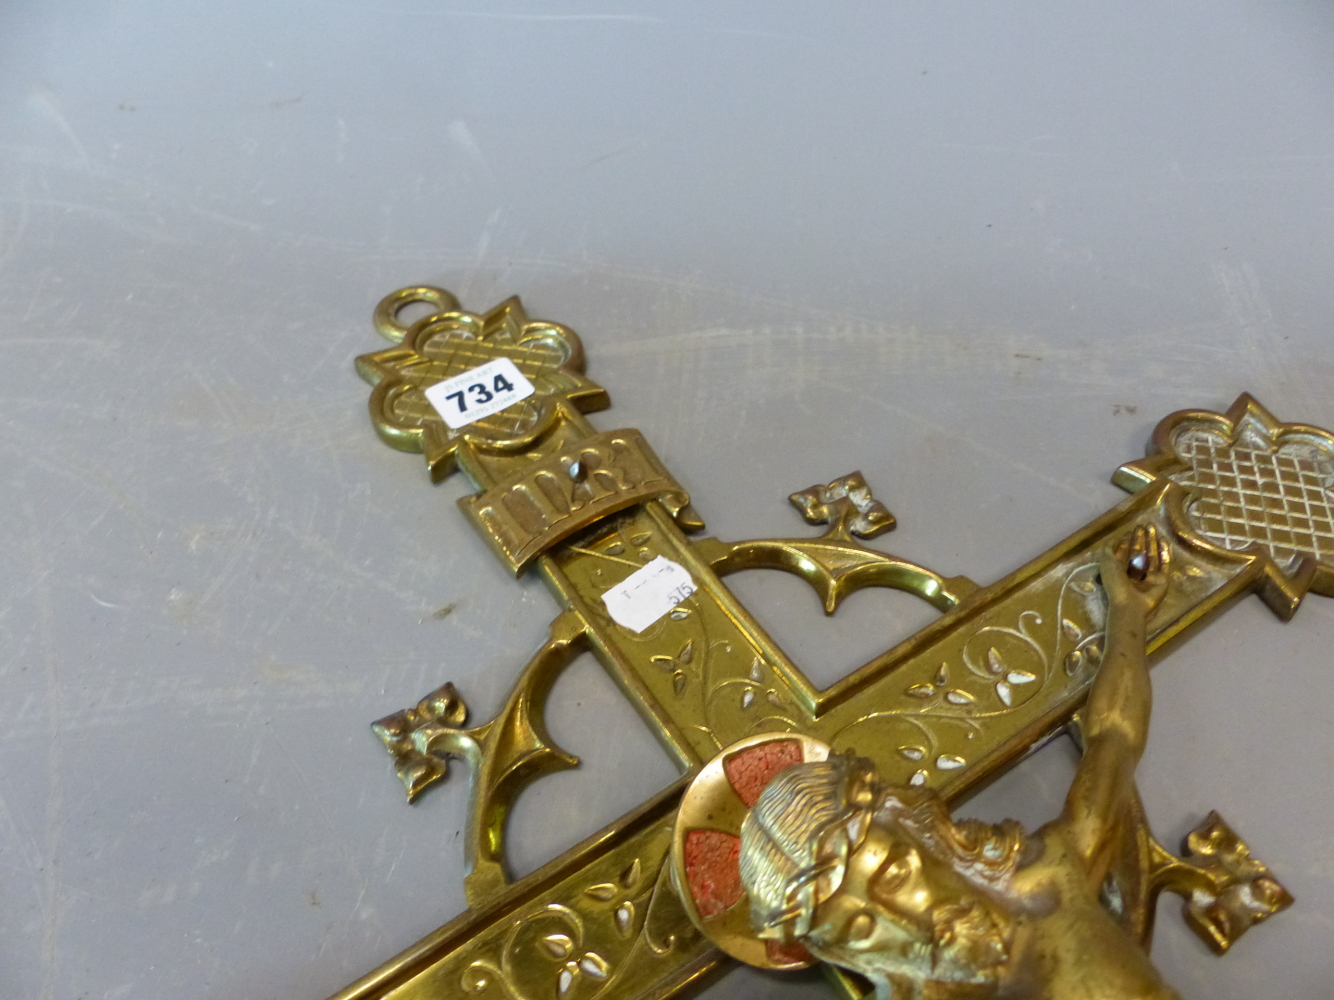 A LATE 19th C. GILT BRONZE CRUCIFIX, CHRISTS HALO PICKED OUT IN RED, THE END OF THE CROSS WITH - Image 4 of 5